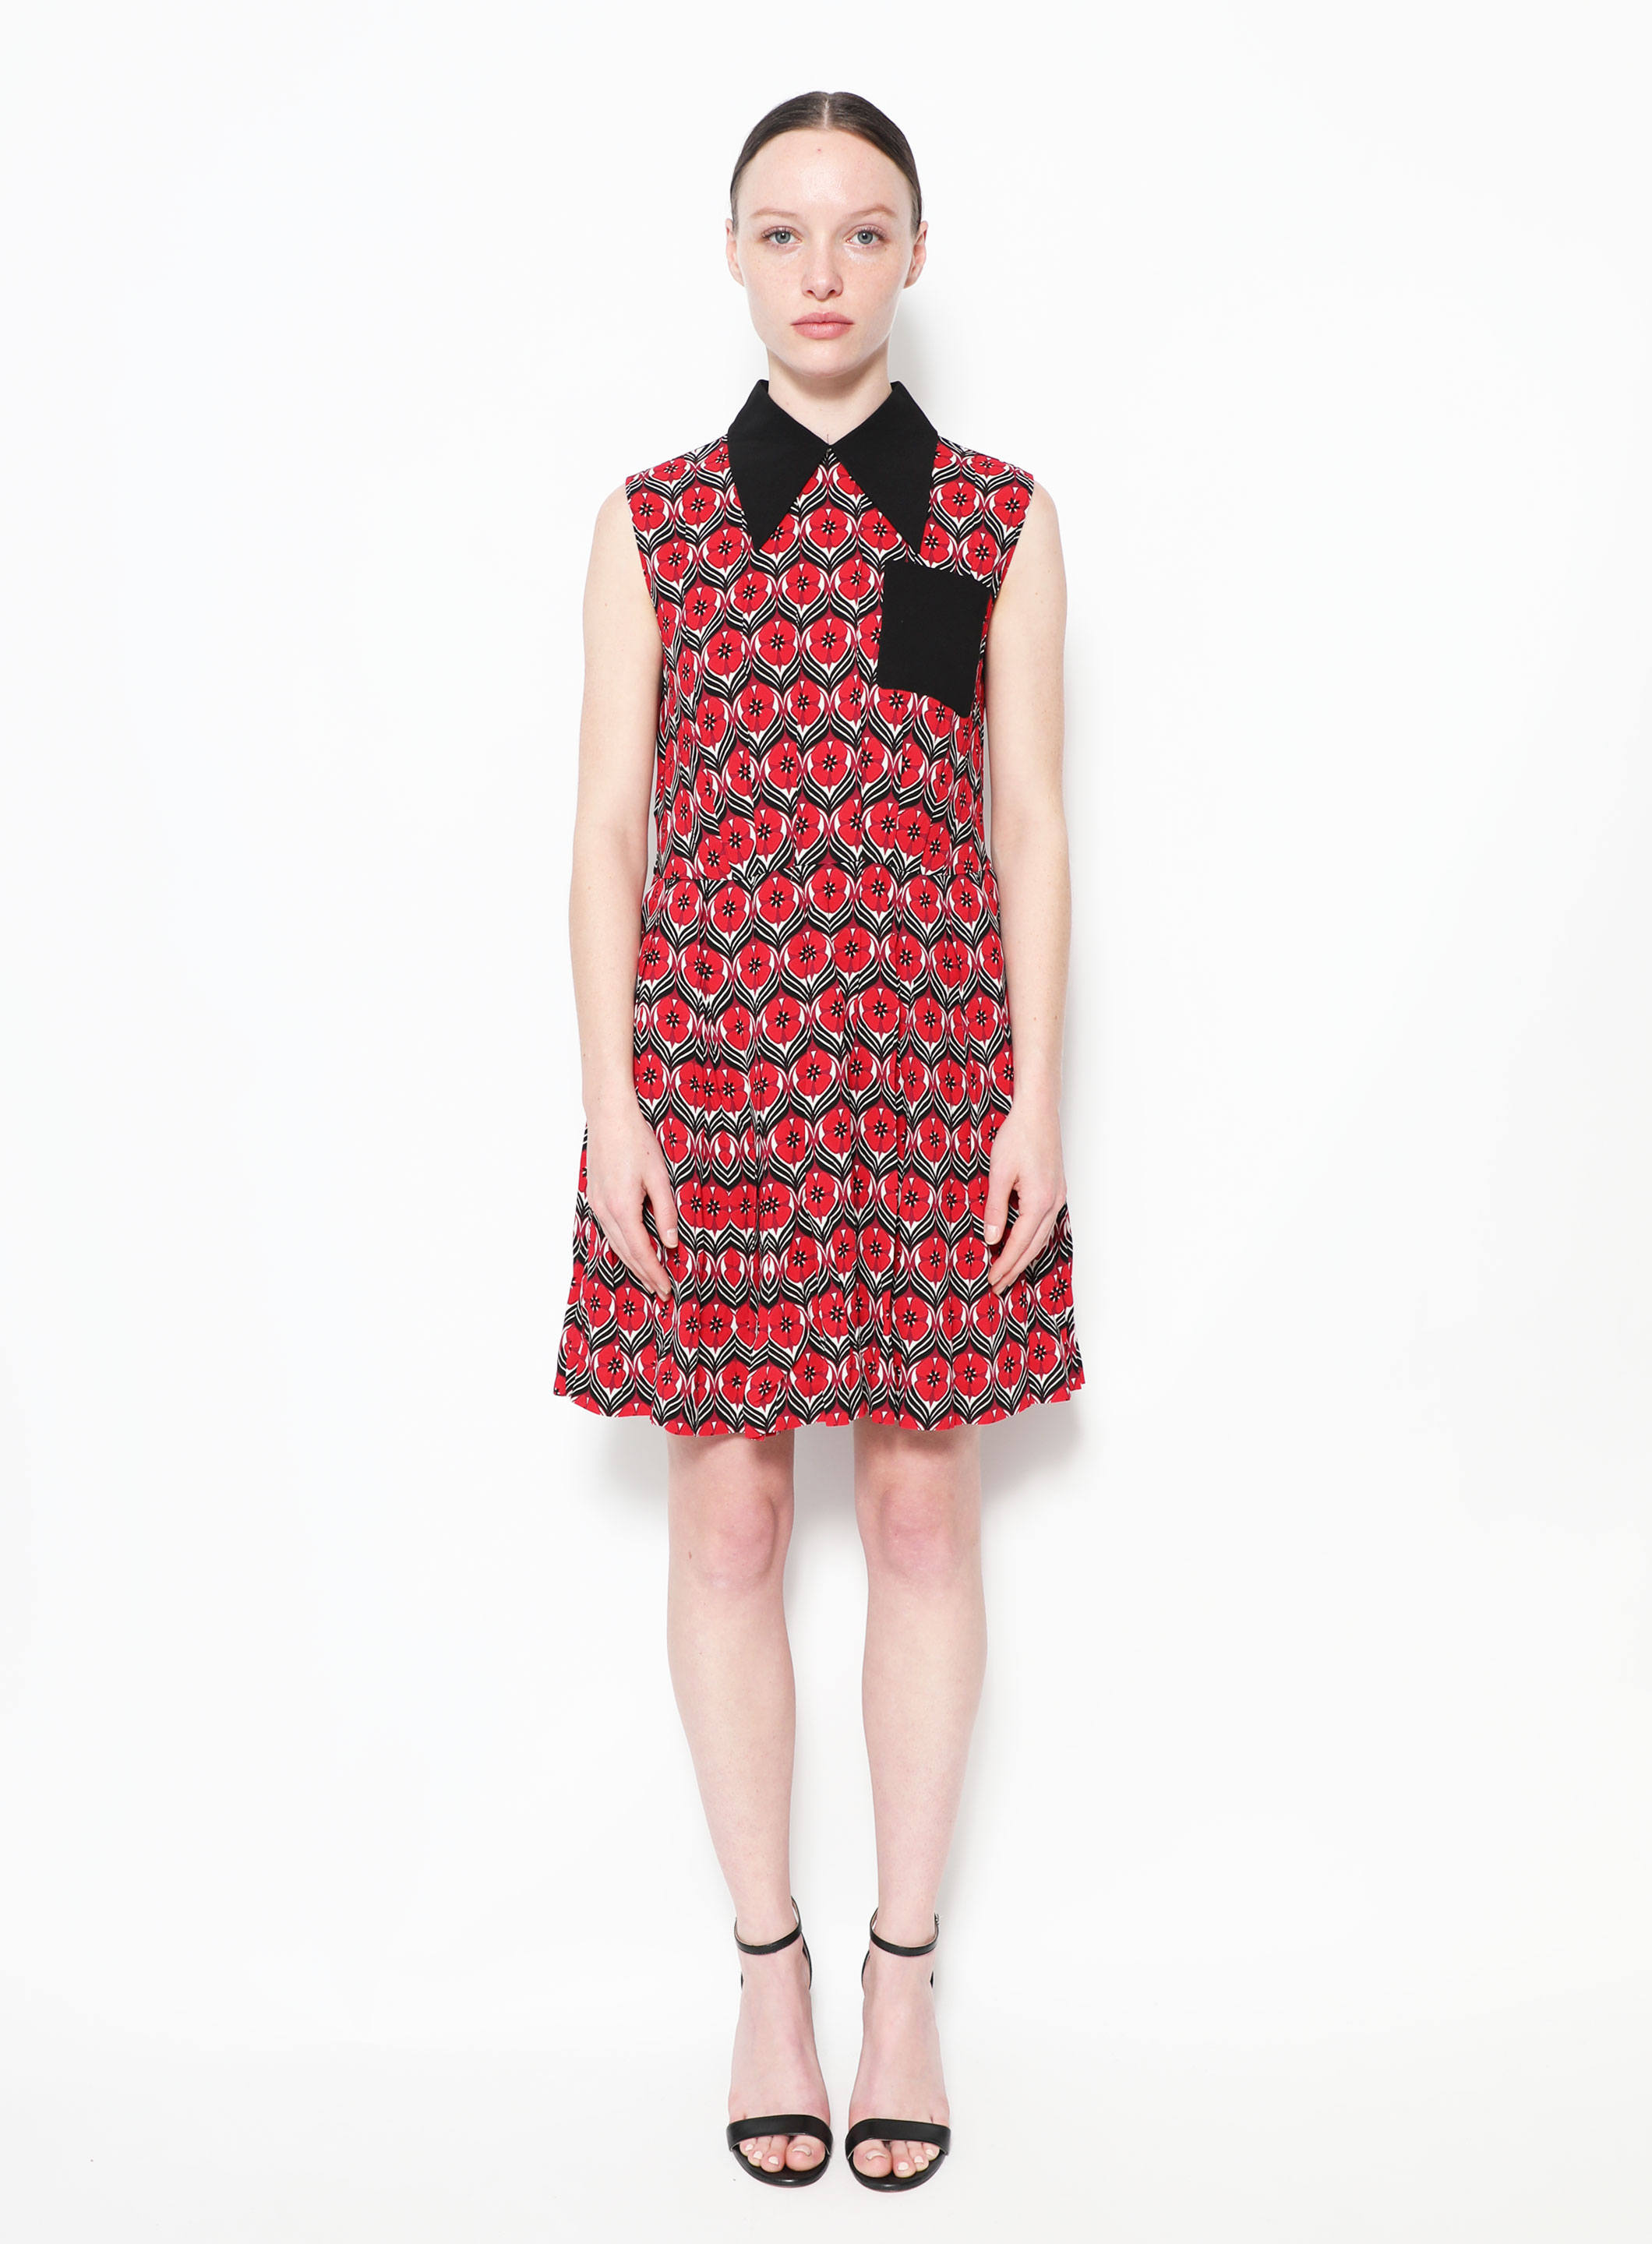 Pre-Fall 2015 Floral Crêpe Dress | Authentic & Vintage | ReSEE